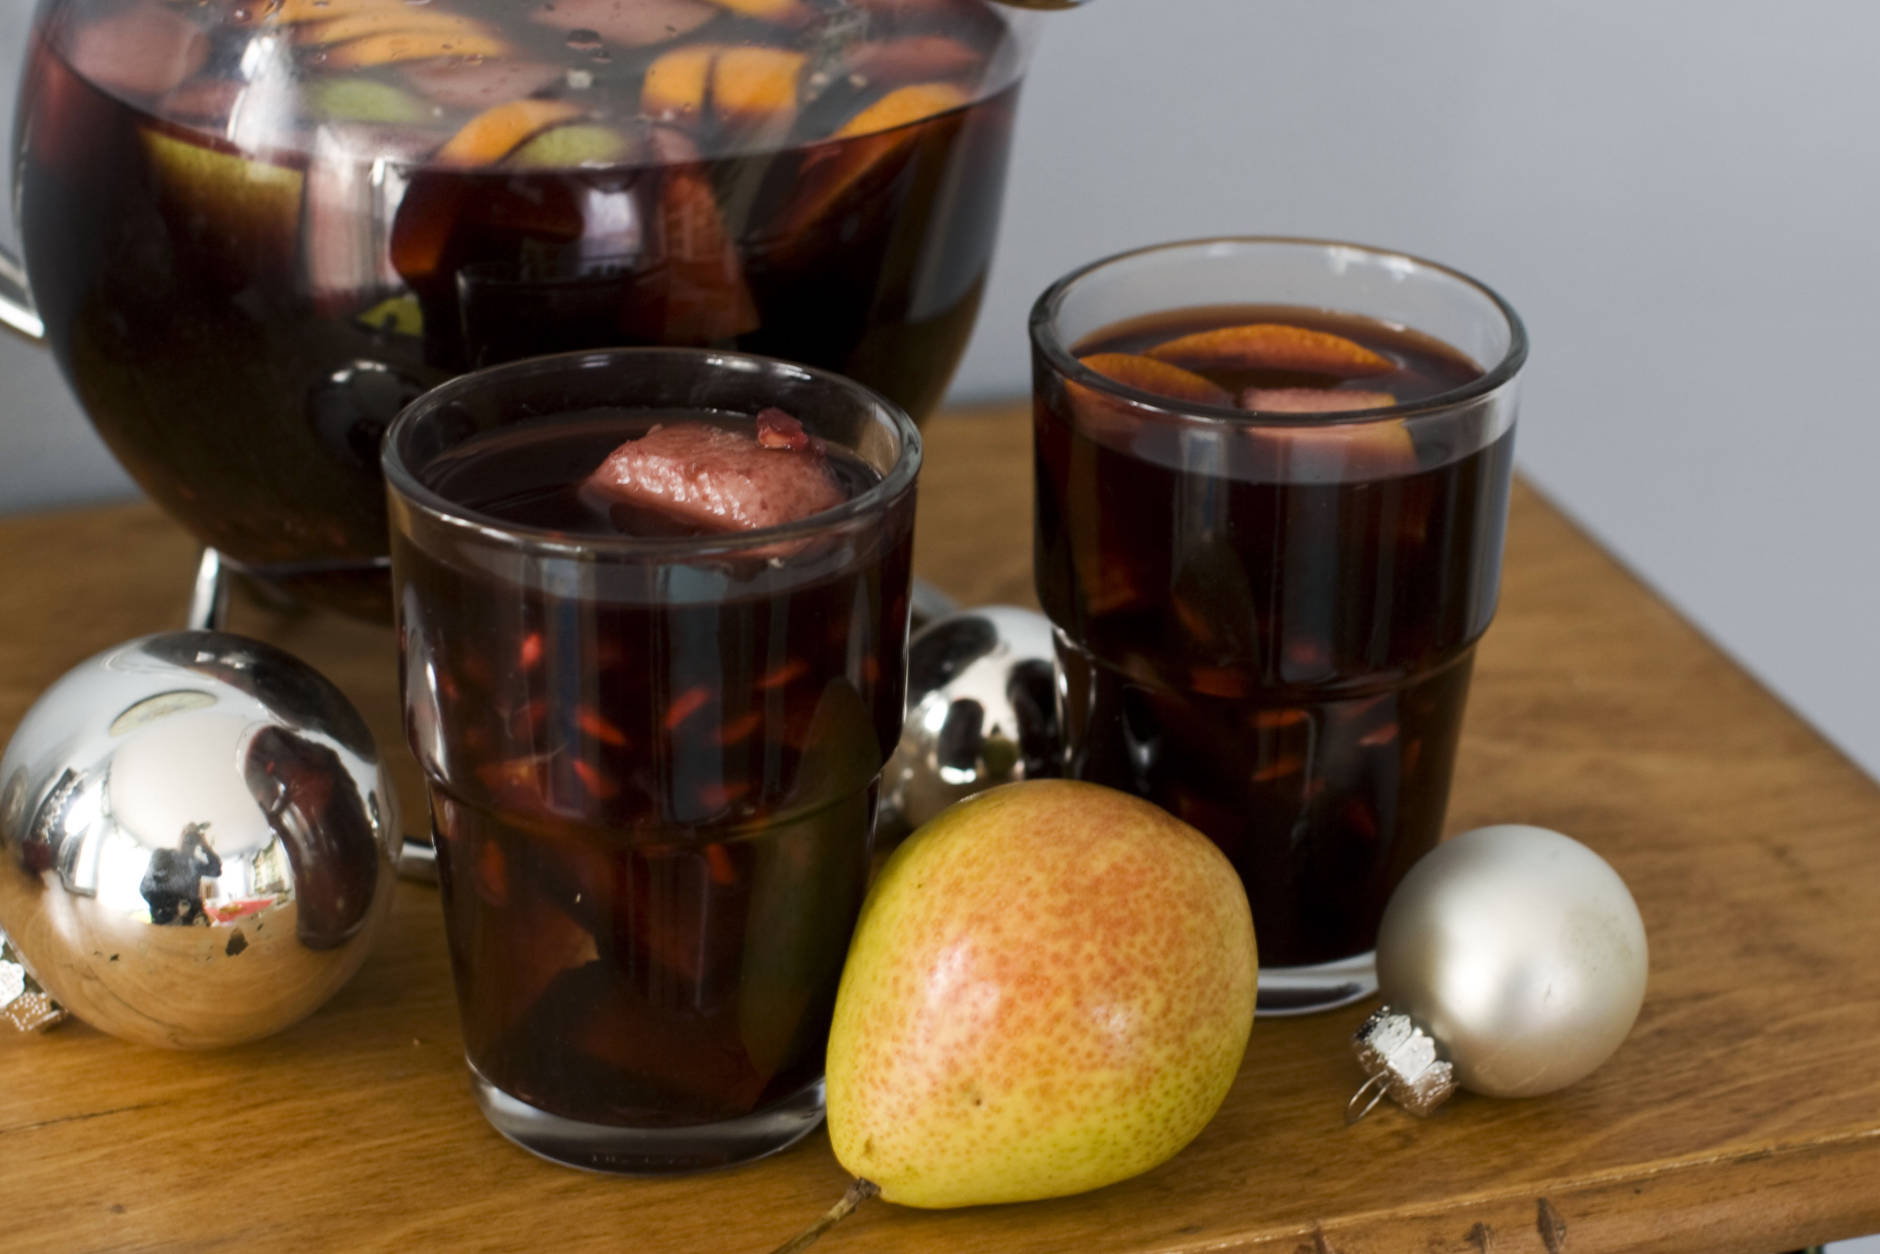 n this image taken on Monday, Nov. 26, 2012, Christmas Sangria is shown in Concord, N.H. (AP Photo/Matthew Mead)